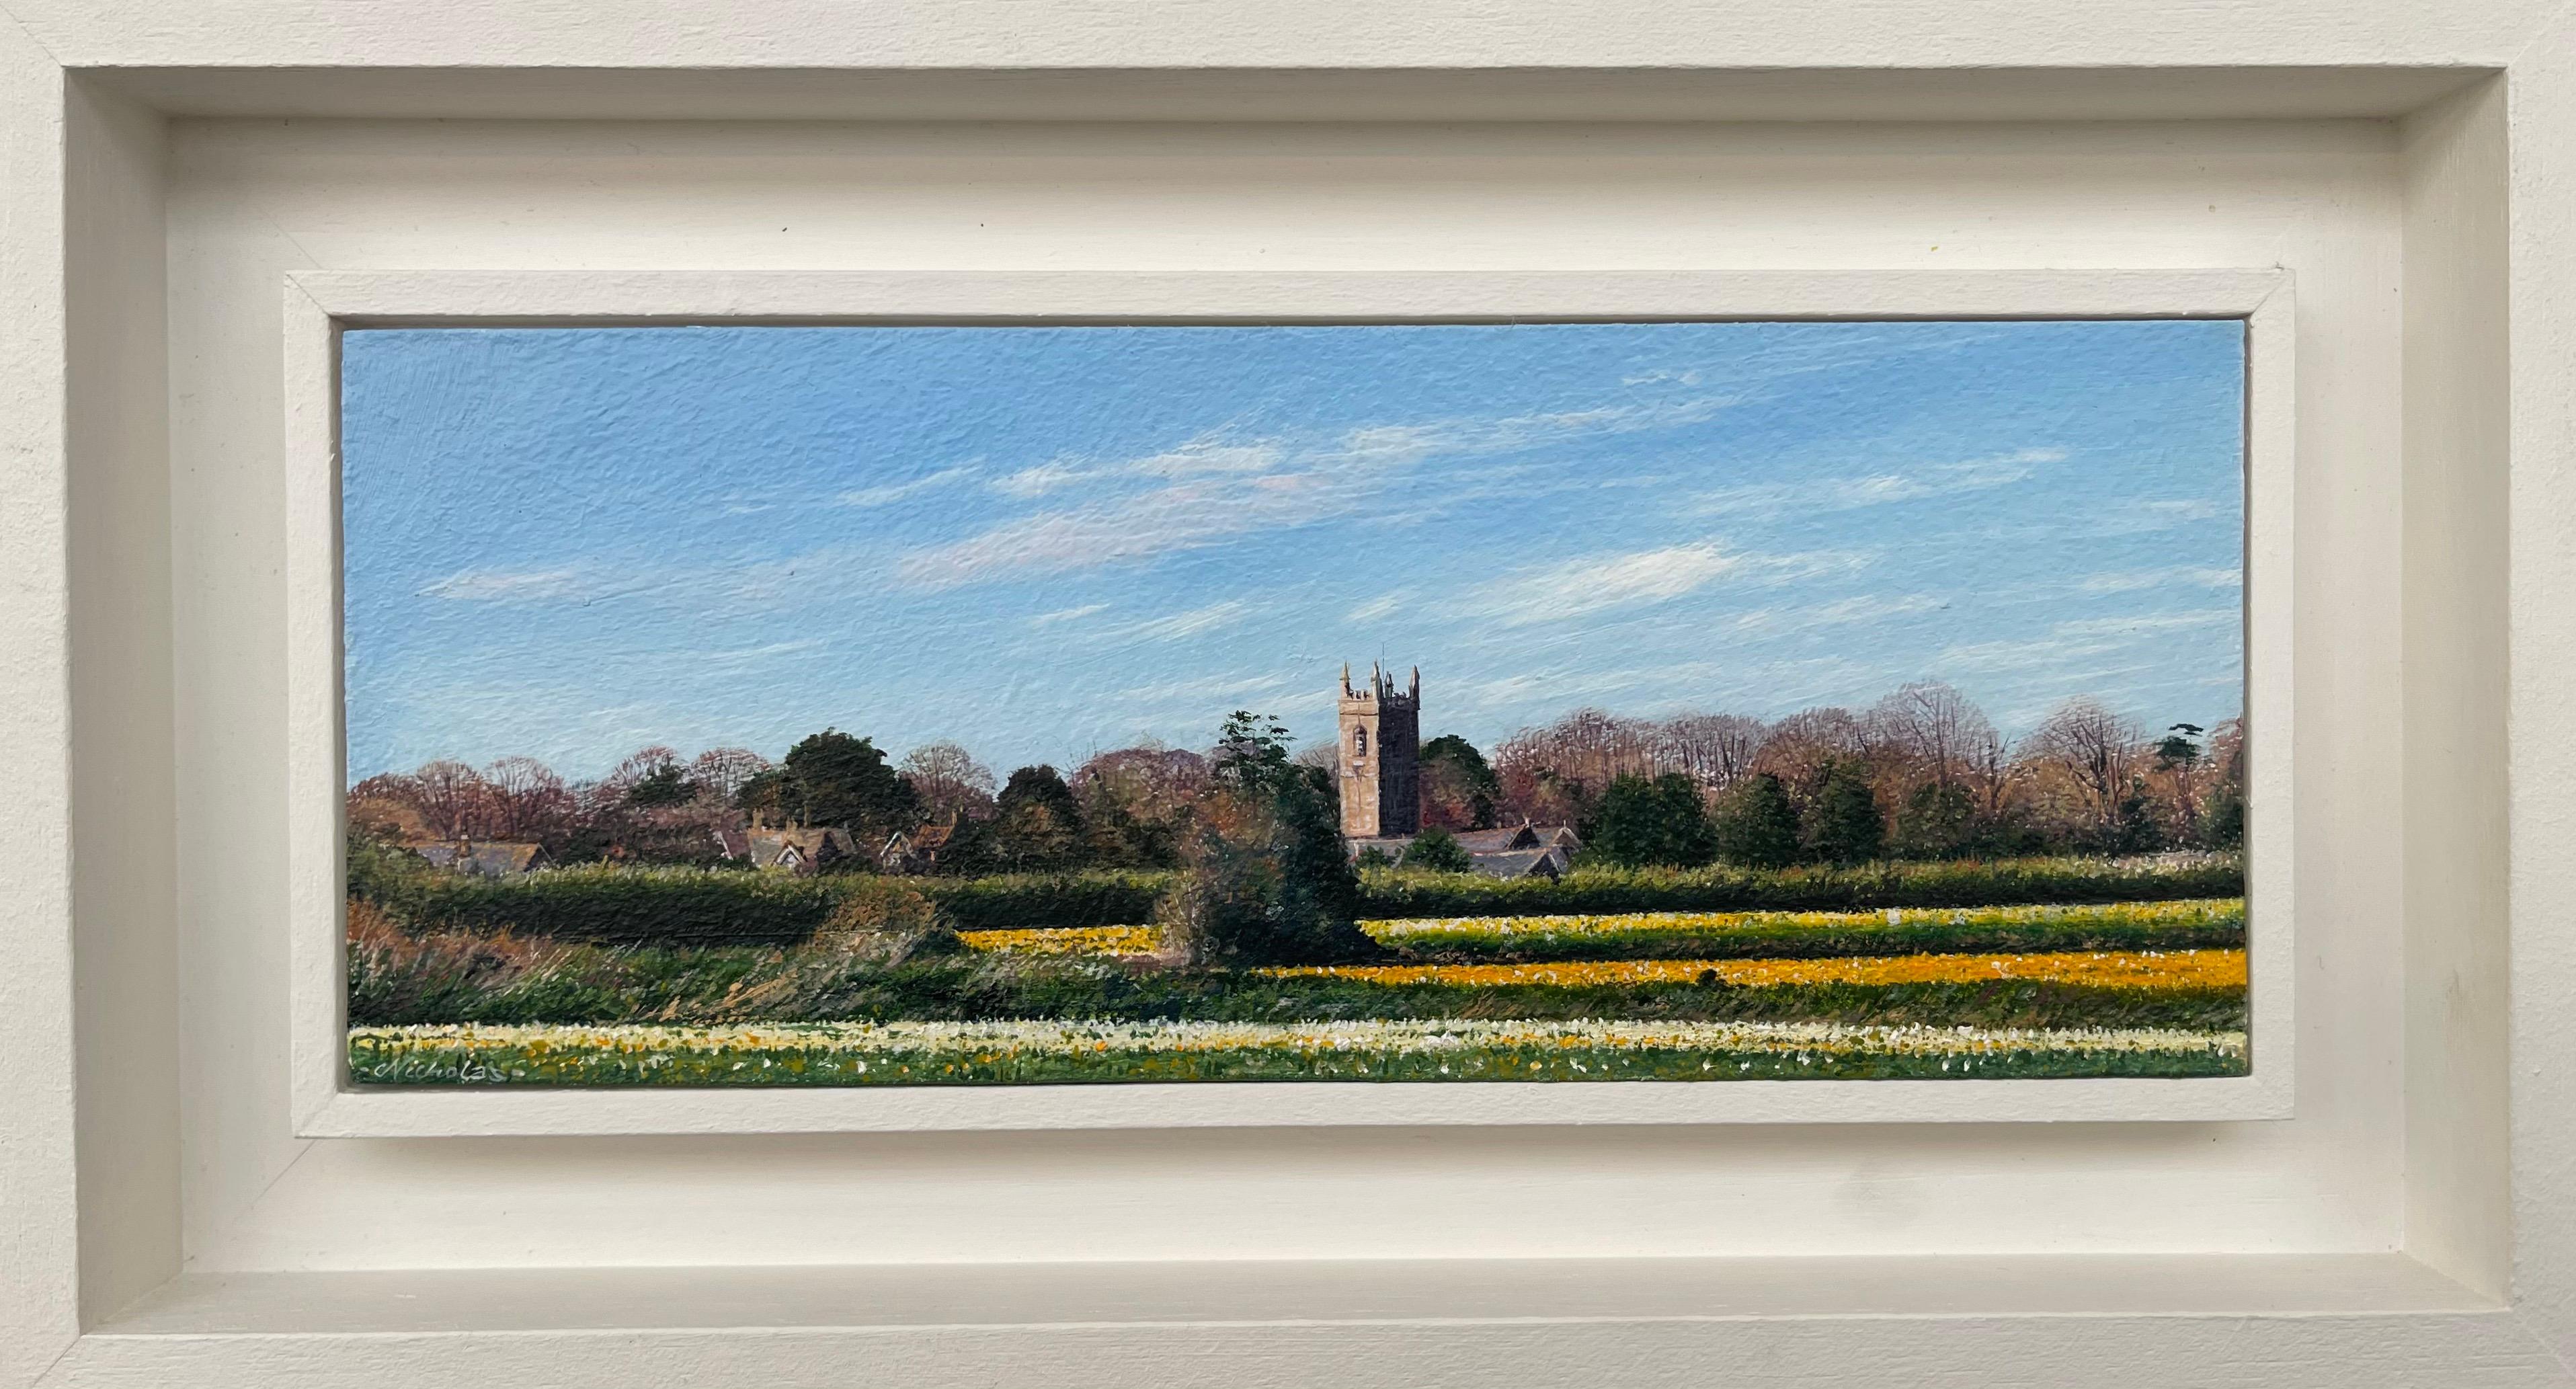 Daffodil Fields English Landscape Painting by Contemporary Photorealist Artist